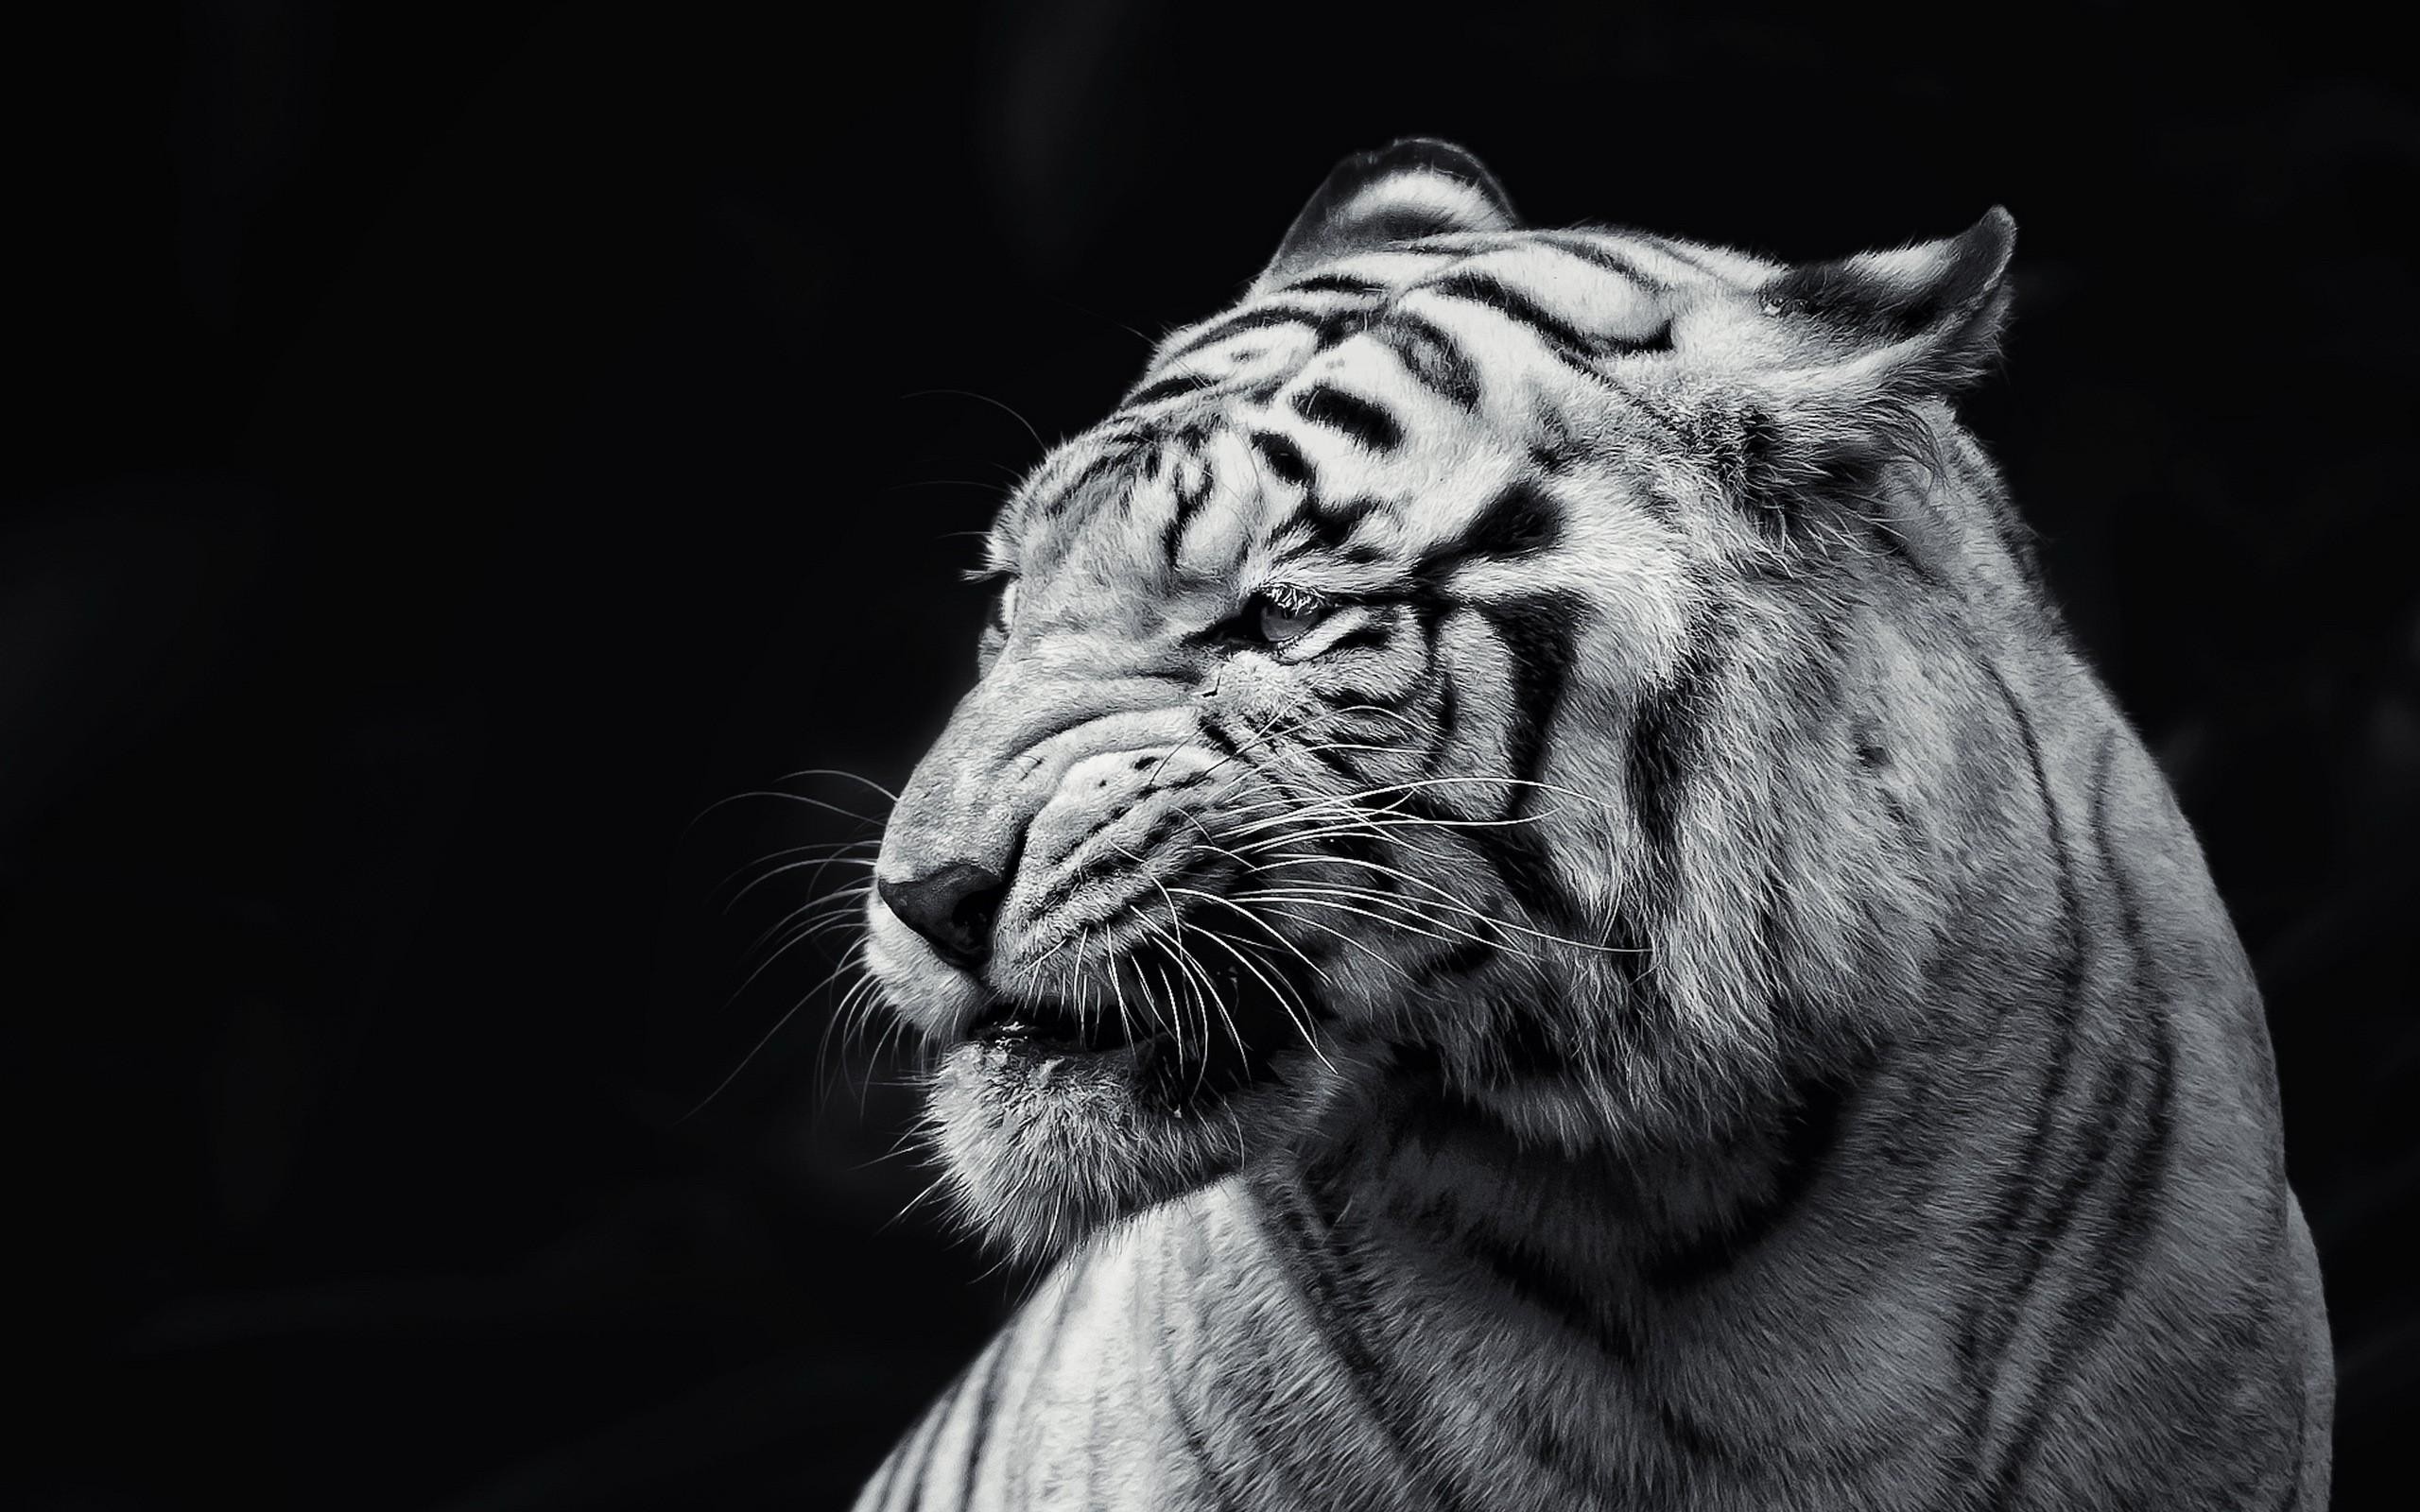 Lion Wallpaper Black and White (50+ images)